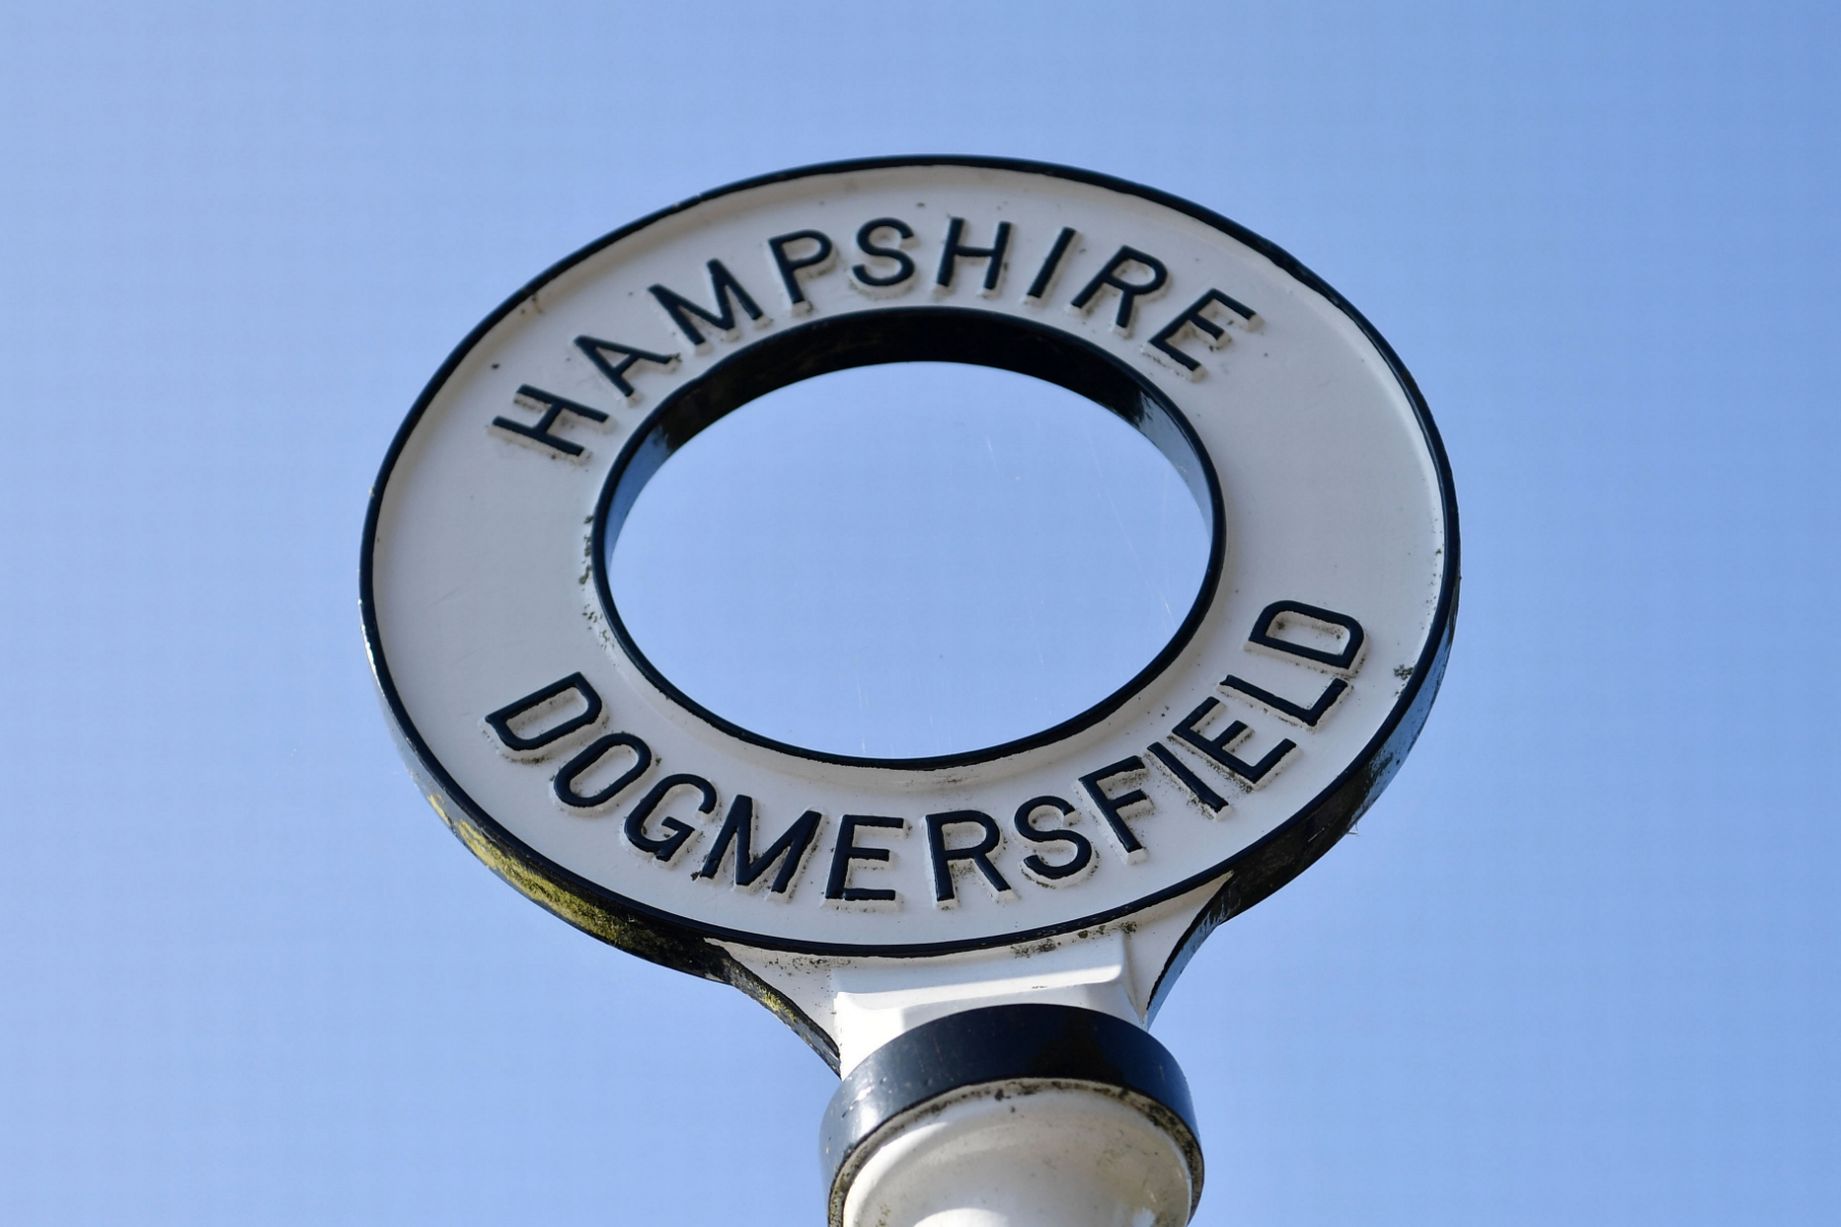 New Article About Dogmersfield on Hampshire Live Website